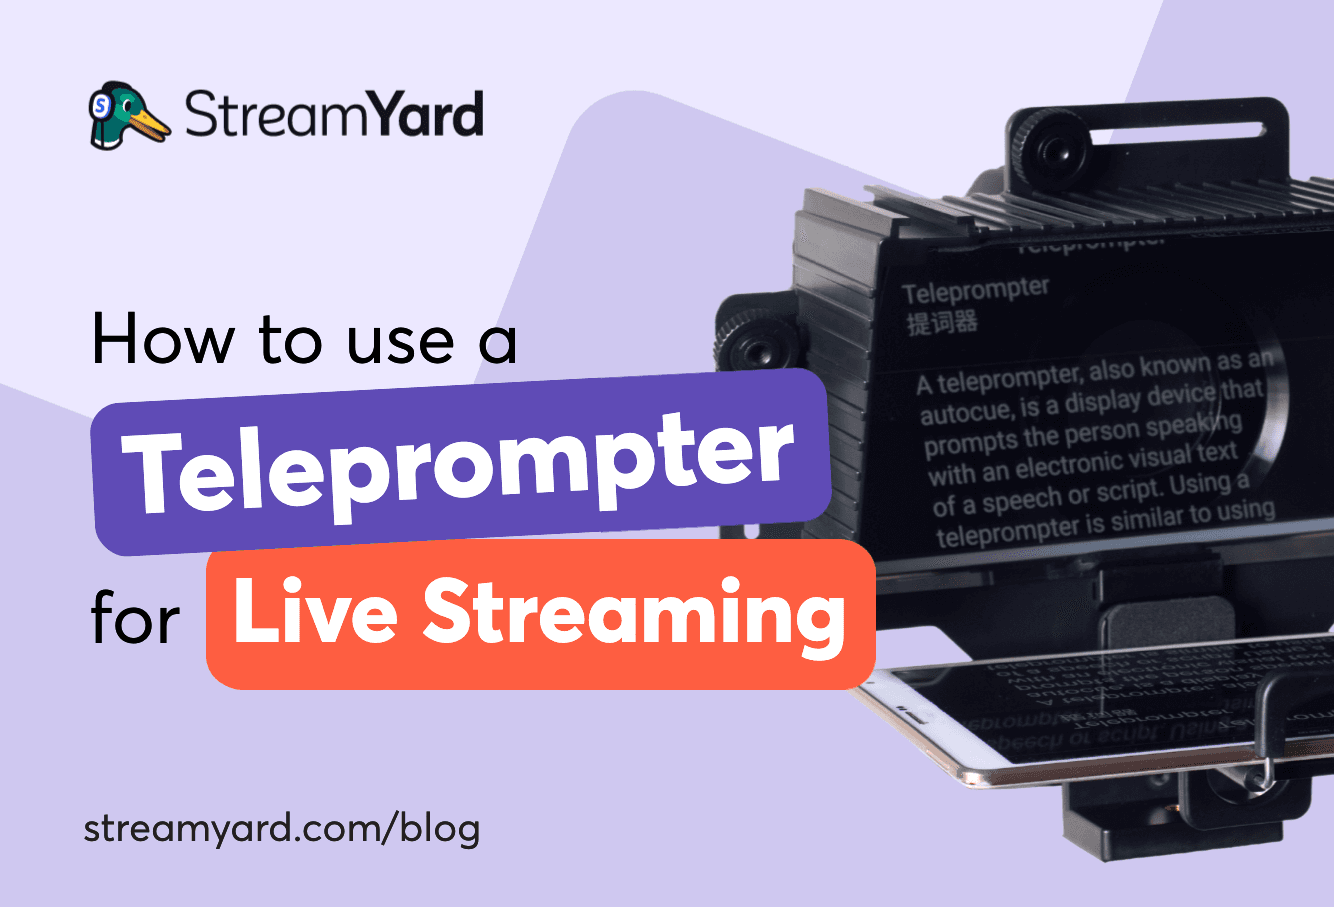 Use a teleprompter for live streaming and make much more professional-looking broadcasts. Read this guide for tips and tricks.